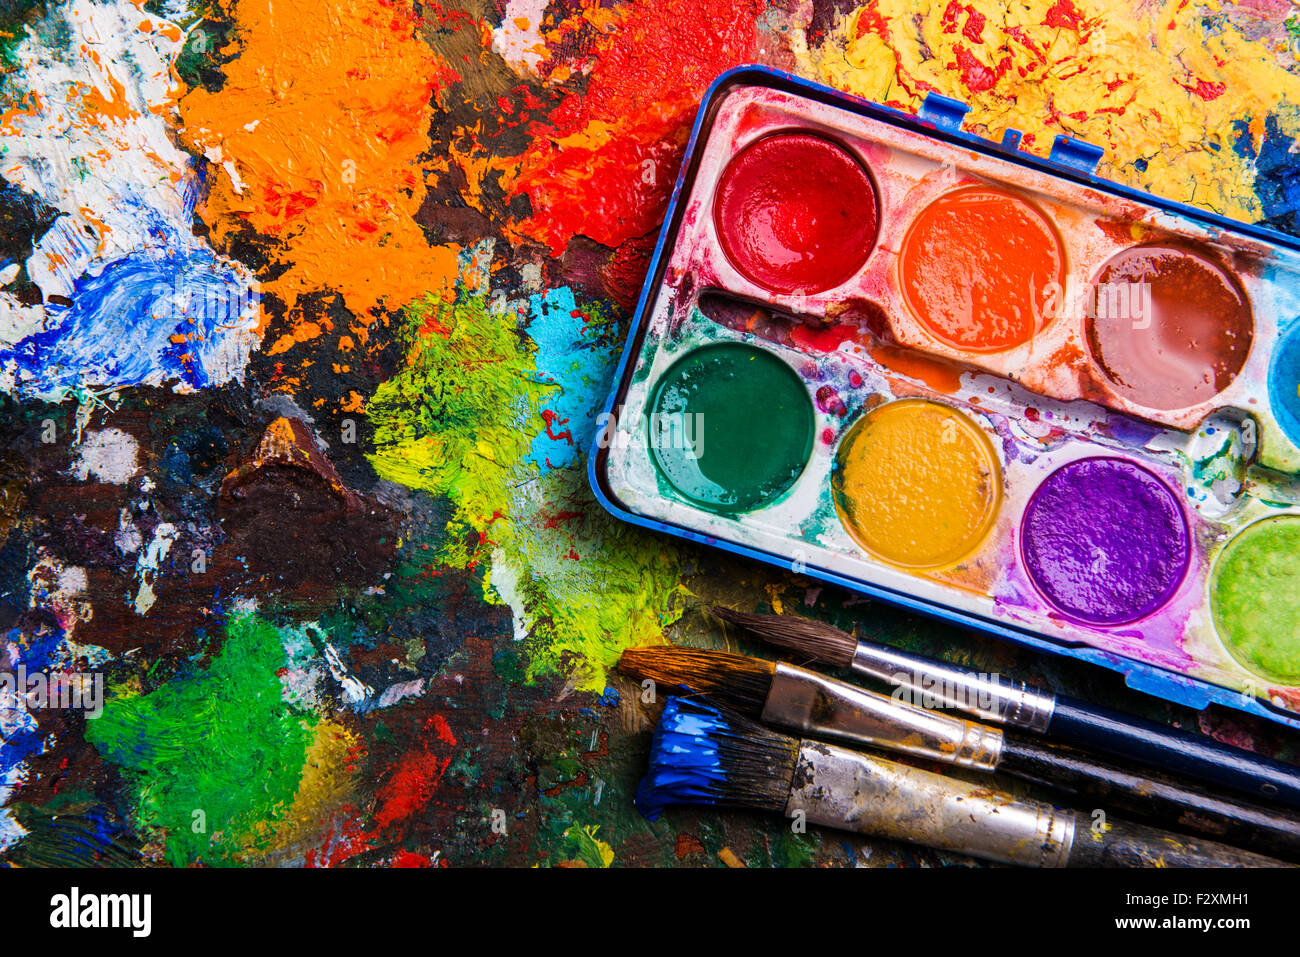 Desk of an artist with watercolor paints and paintbrushes. Stock Photo